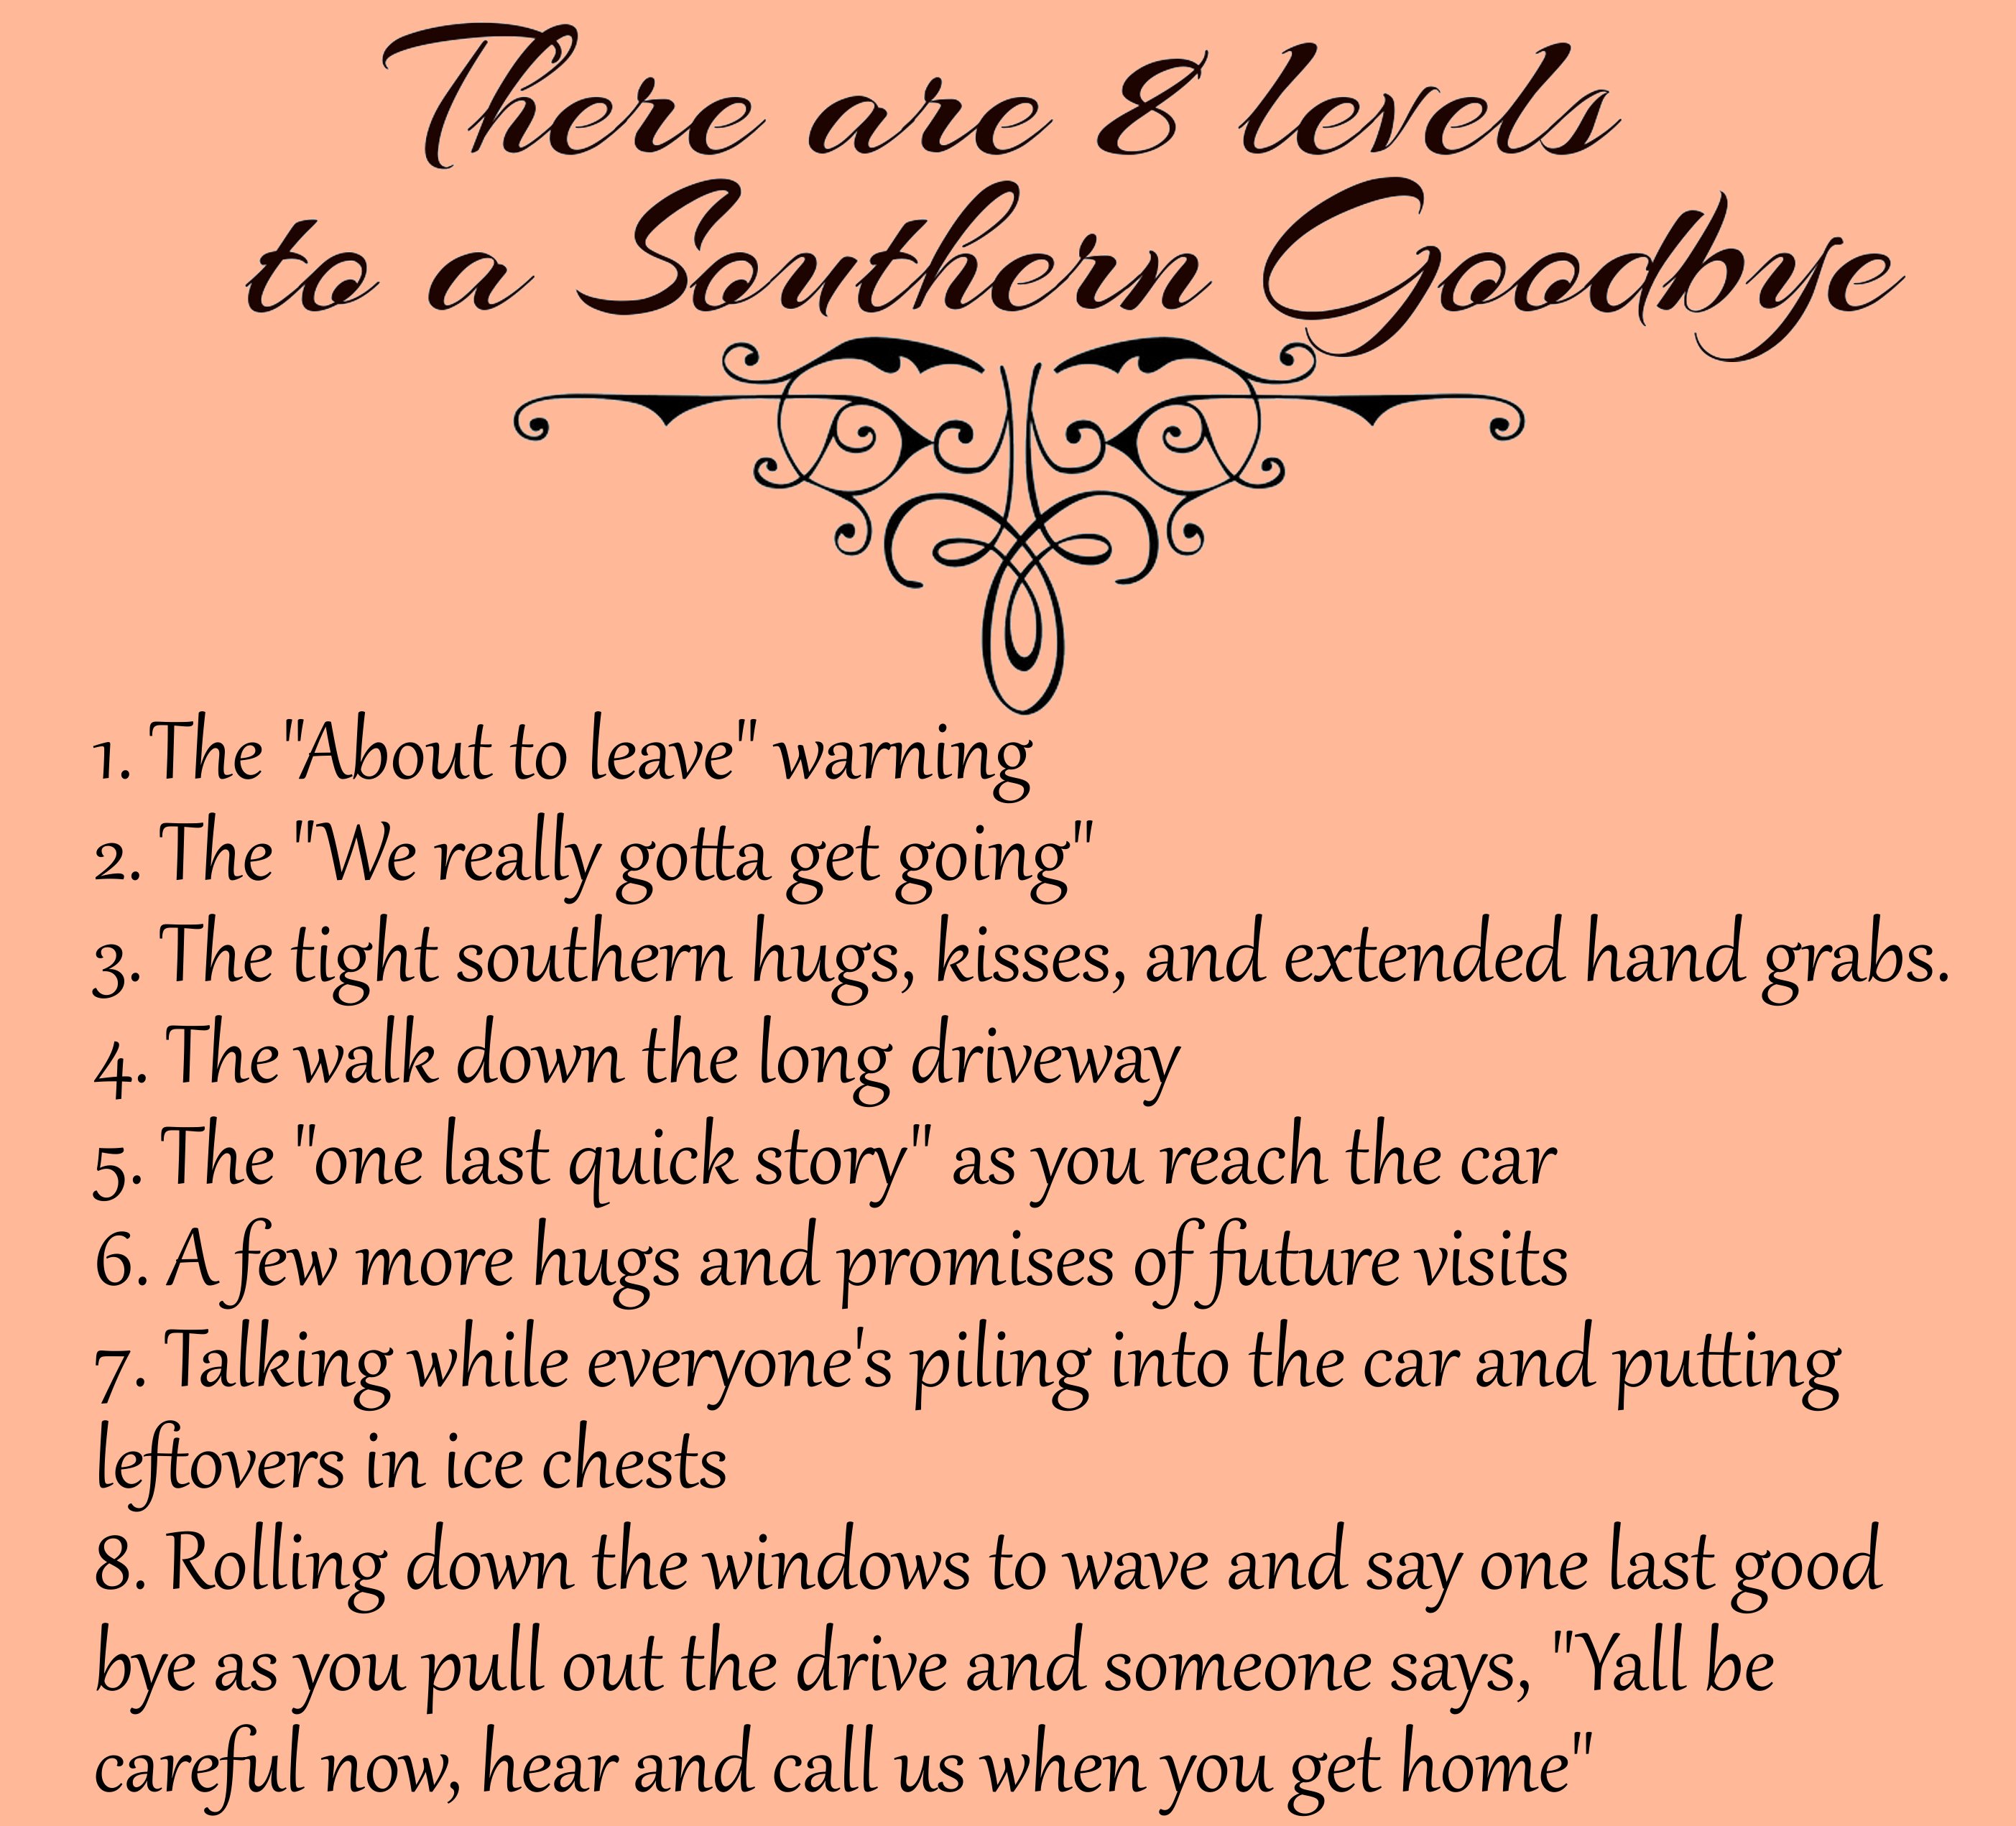 manthan - There are 8 levels to a Southern Goodbye 1. The "About to leave" warning 2. The "We really gotta get going" 3. The tight southern hugs, kisses, and extended hand grabs. 4. The walk down the long driveway 5. The "one last quick story" as you reac